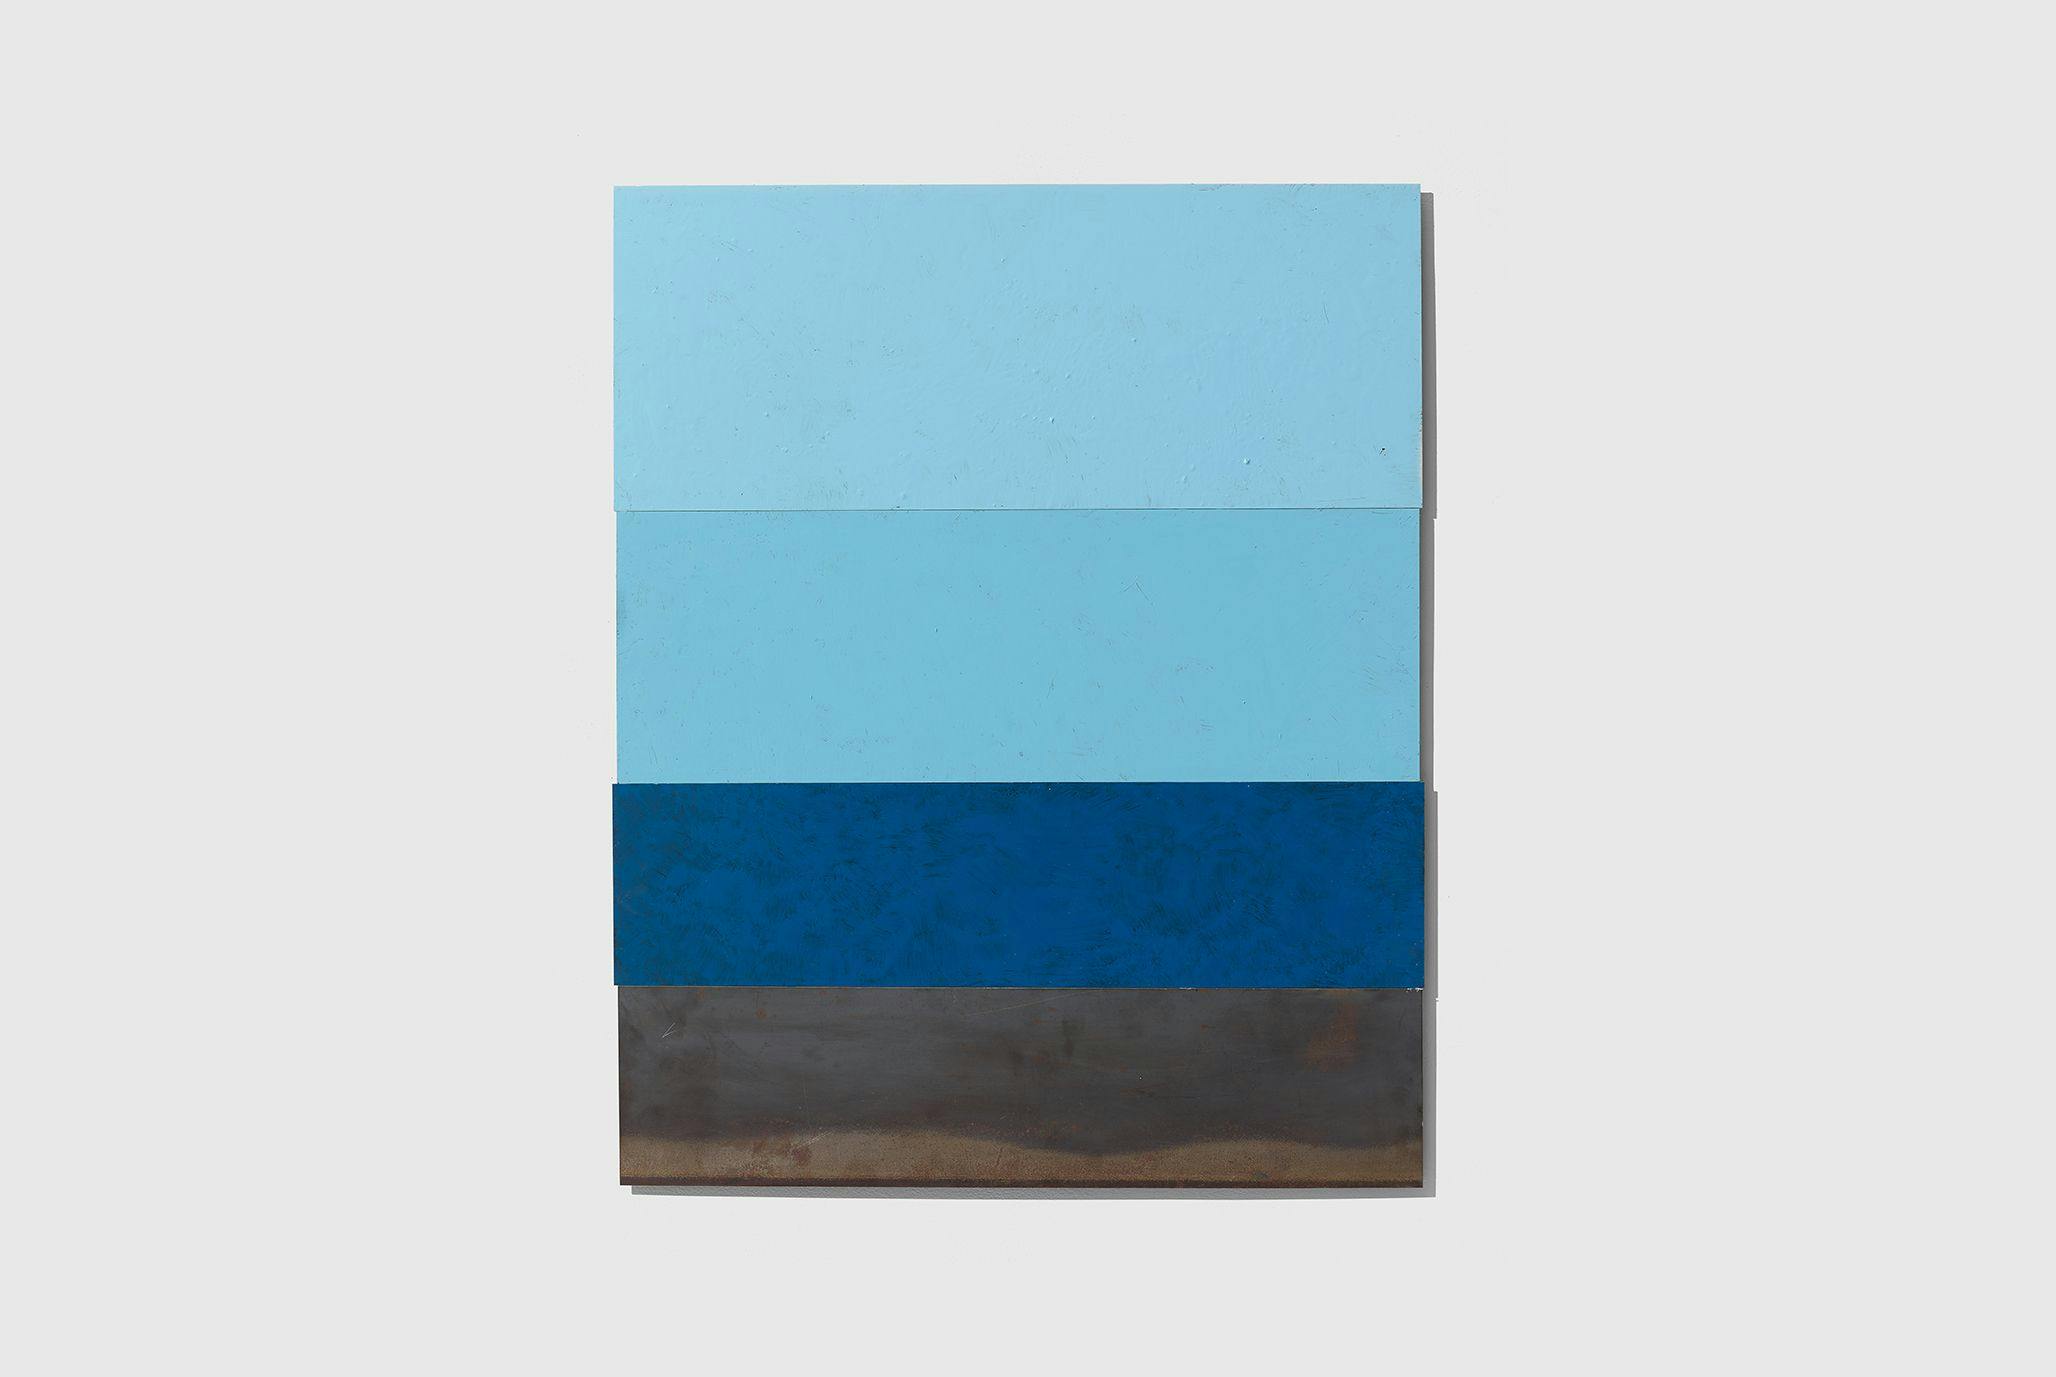 A work by Merrill Wagner, titled One Square Equals Three Blues, dated 2013.